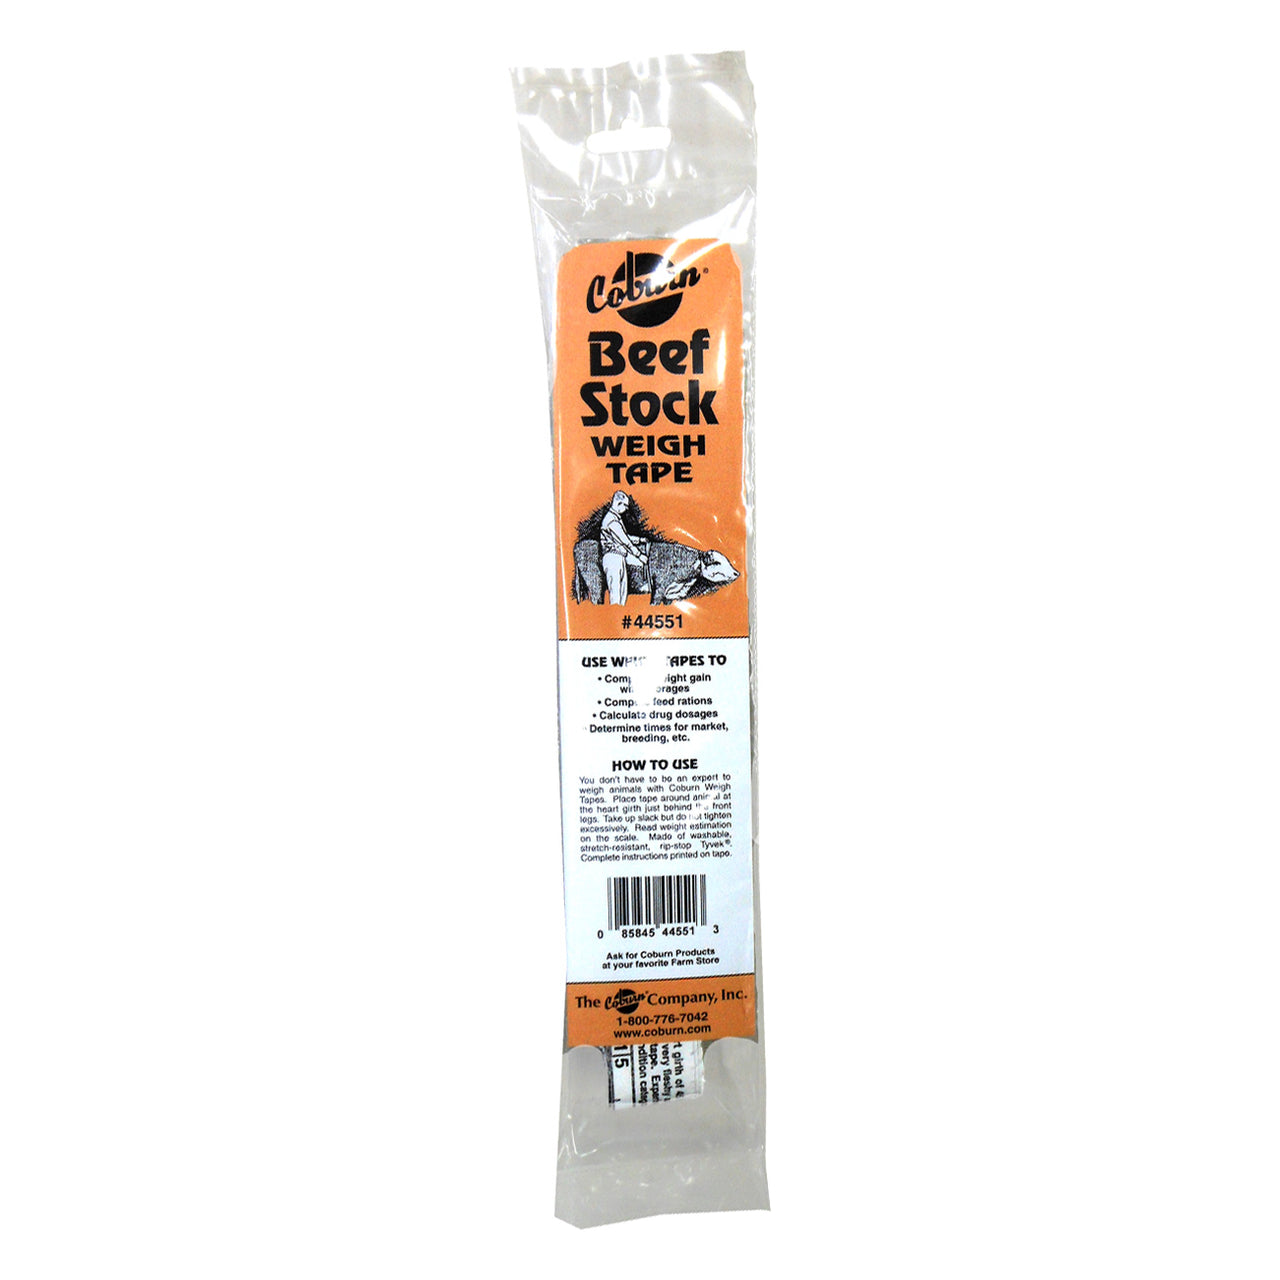 Coburn Improved Beef Stock Tape Lbs/kg - Specialty Measurement Tapes Coburn - Canada